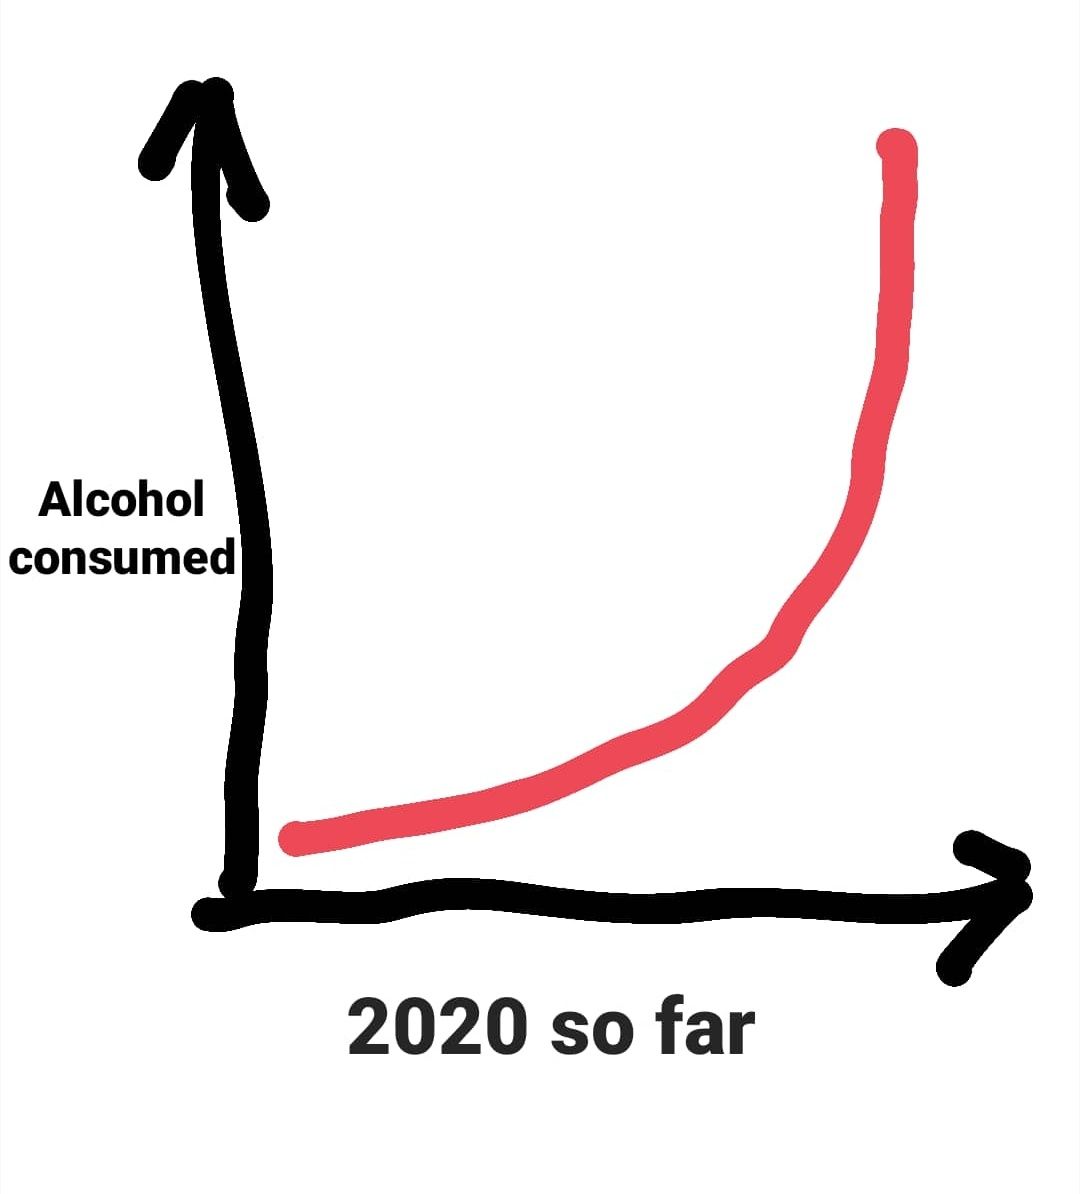 A very insightful graph that I wanted to share.